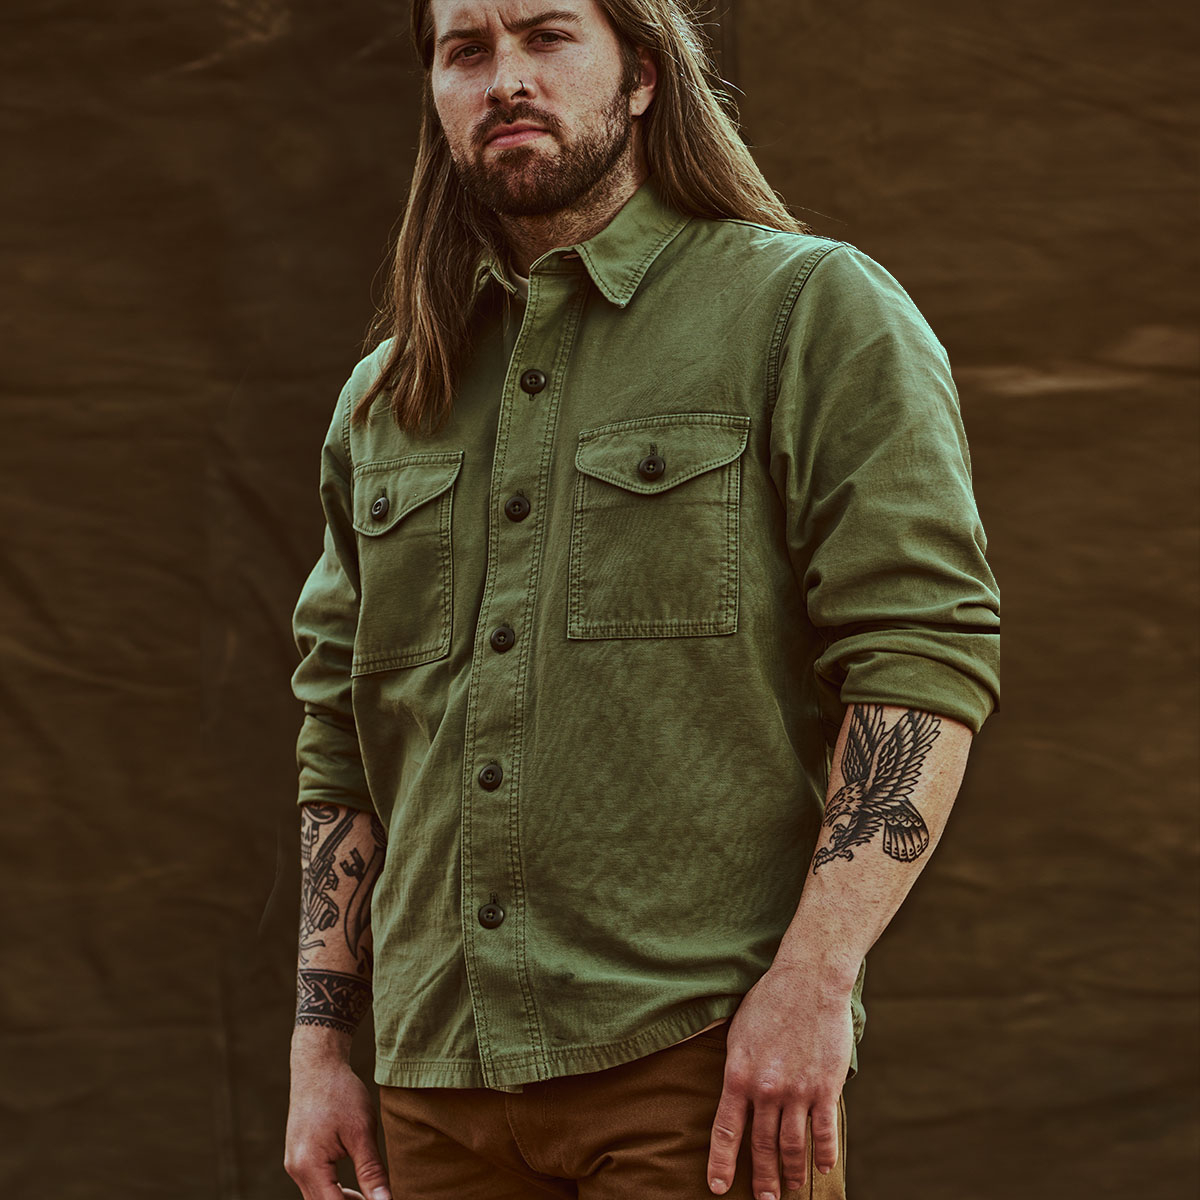 Filson Field Jac-Shirt Washed Fatigue Green, A perfect layer for full coverage in warm weather or as an overshirt when temps cool